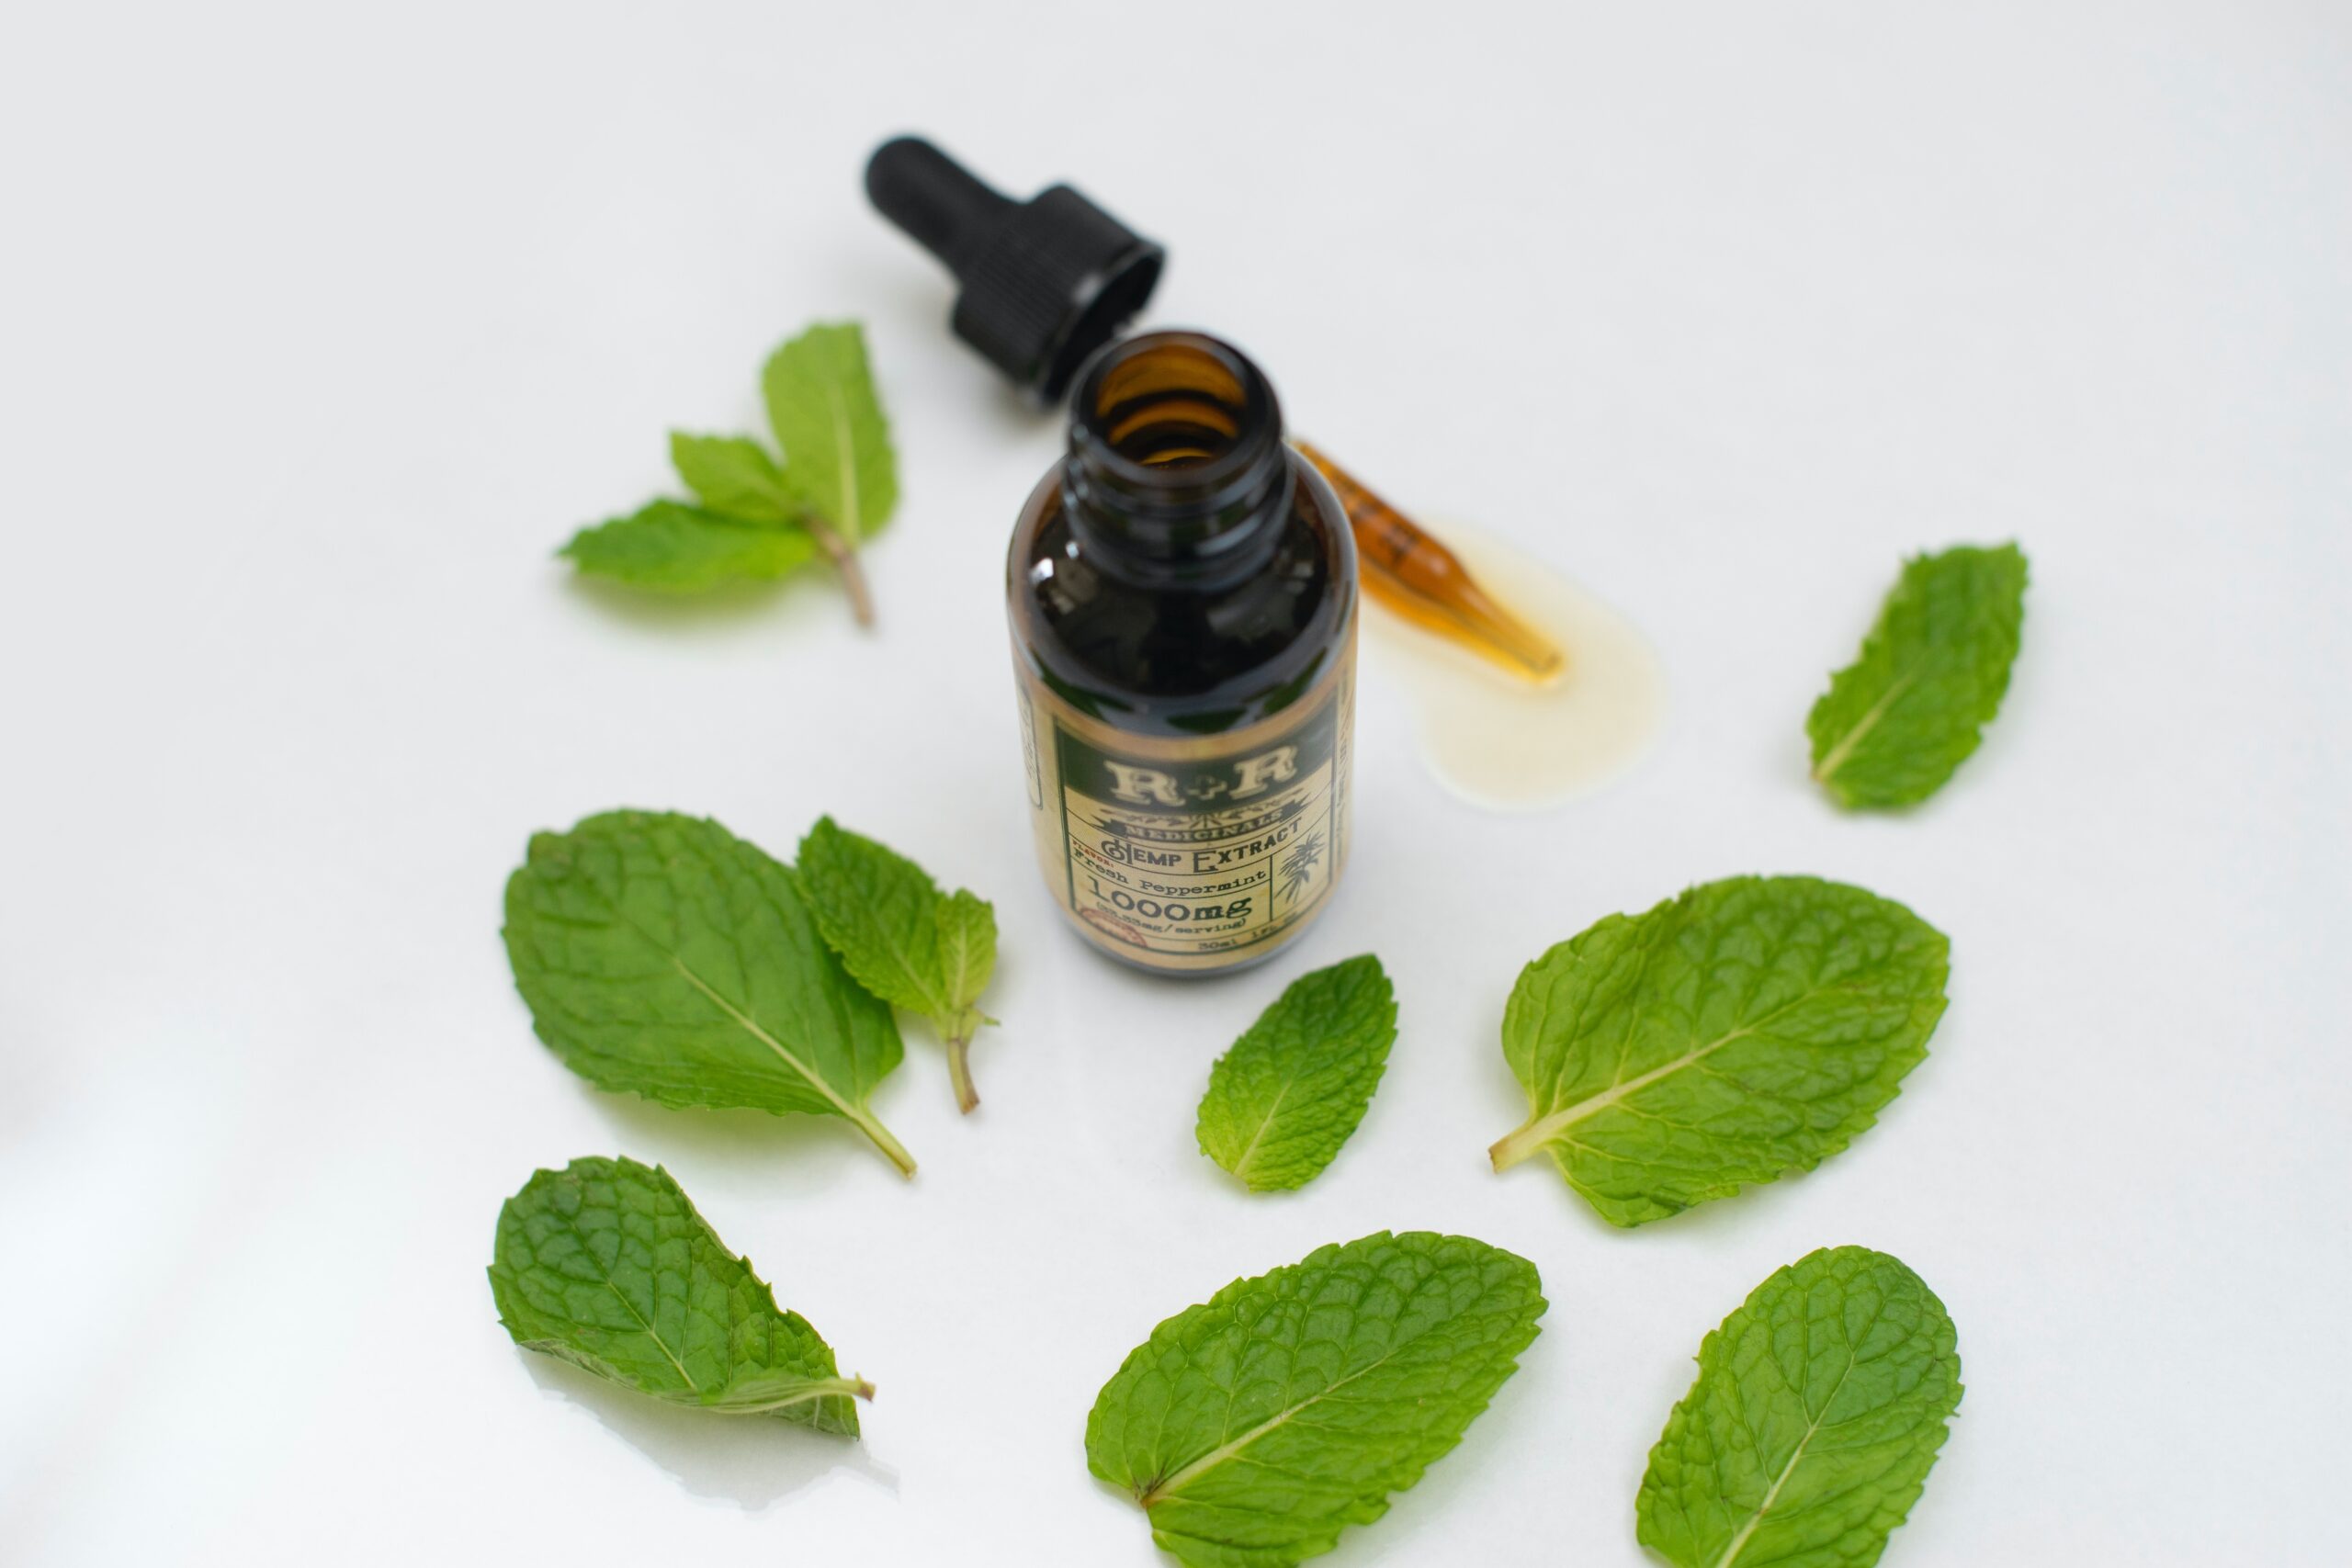 Discover the refreshing power of peppermint oil and its incredible benefits. Learn how peppermint oil can provide headache relief, freshen breath, soothe tummy troubles, boost focus and energy, and act as a natural bug repellent. Embrace the power of peppermint oil and let nature work its magic for your mind, body, and senses.